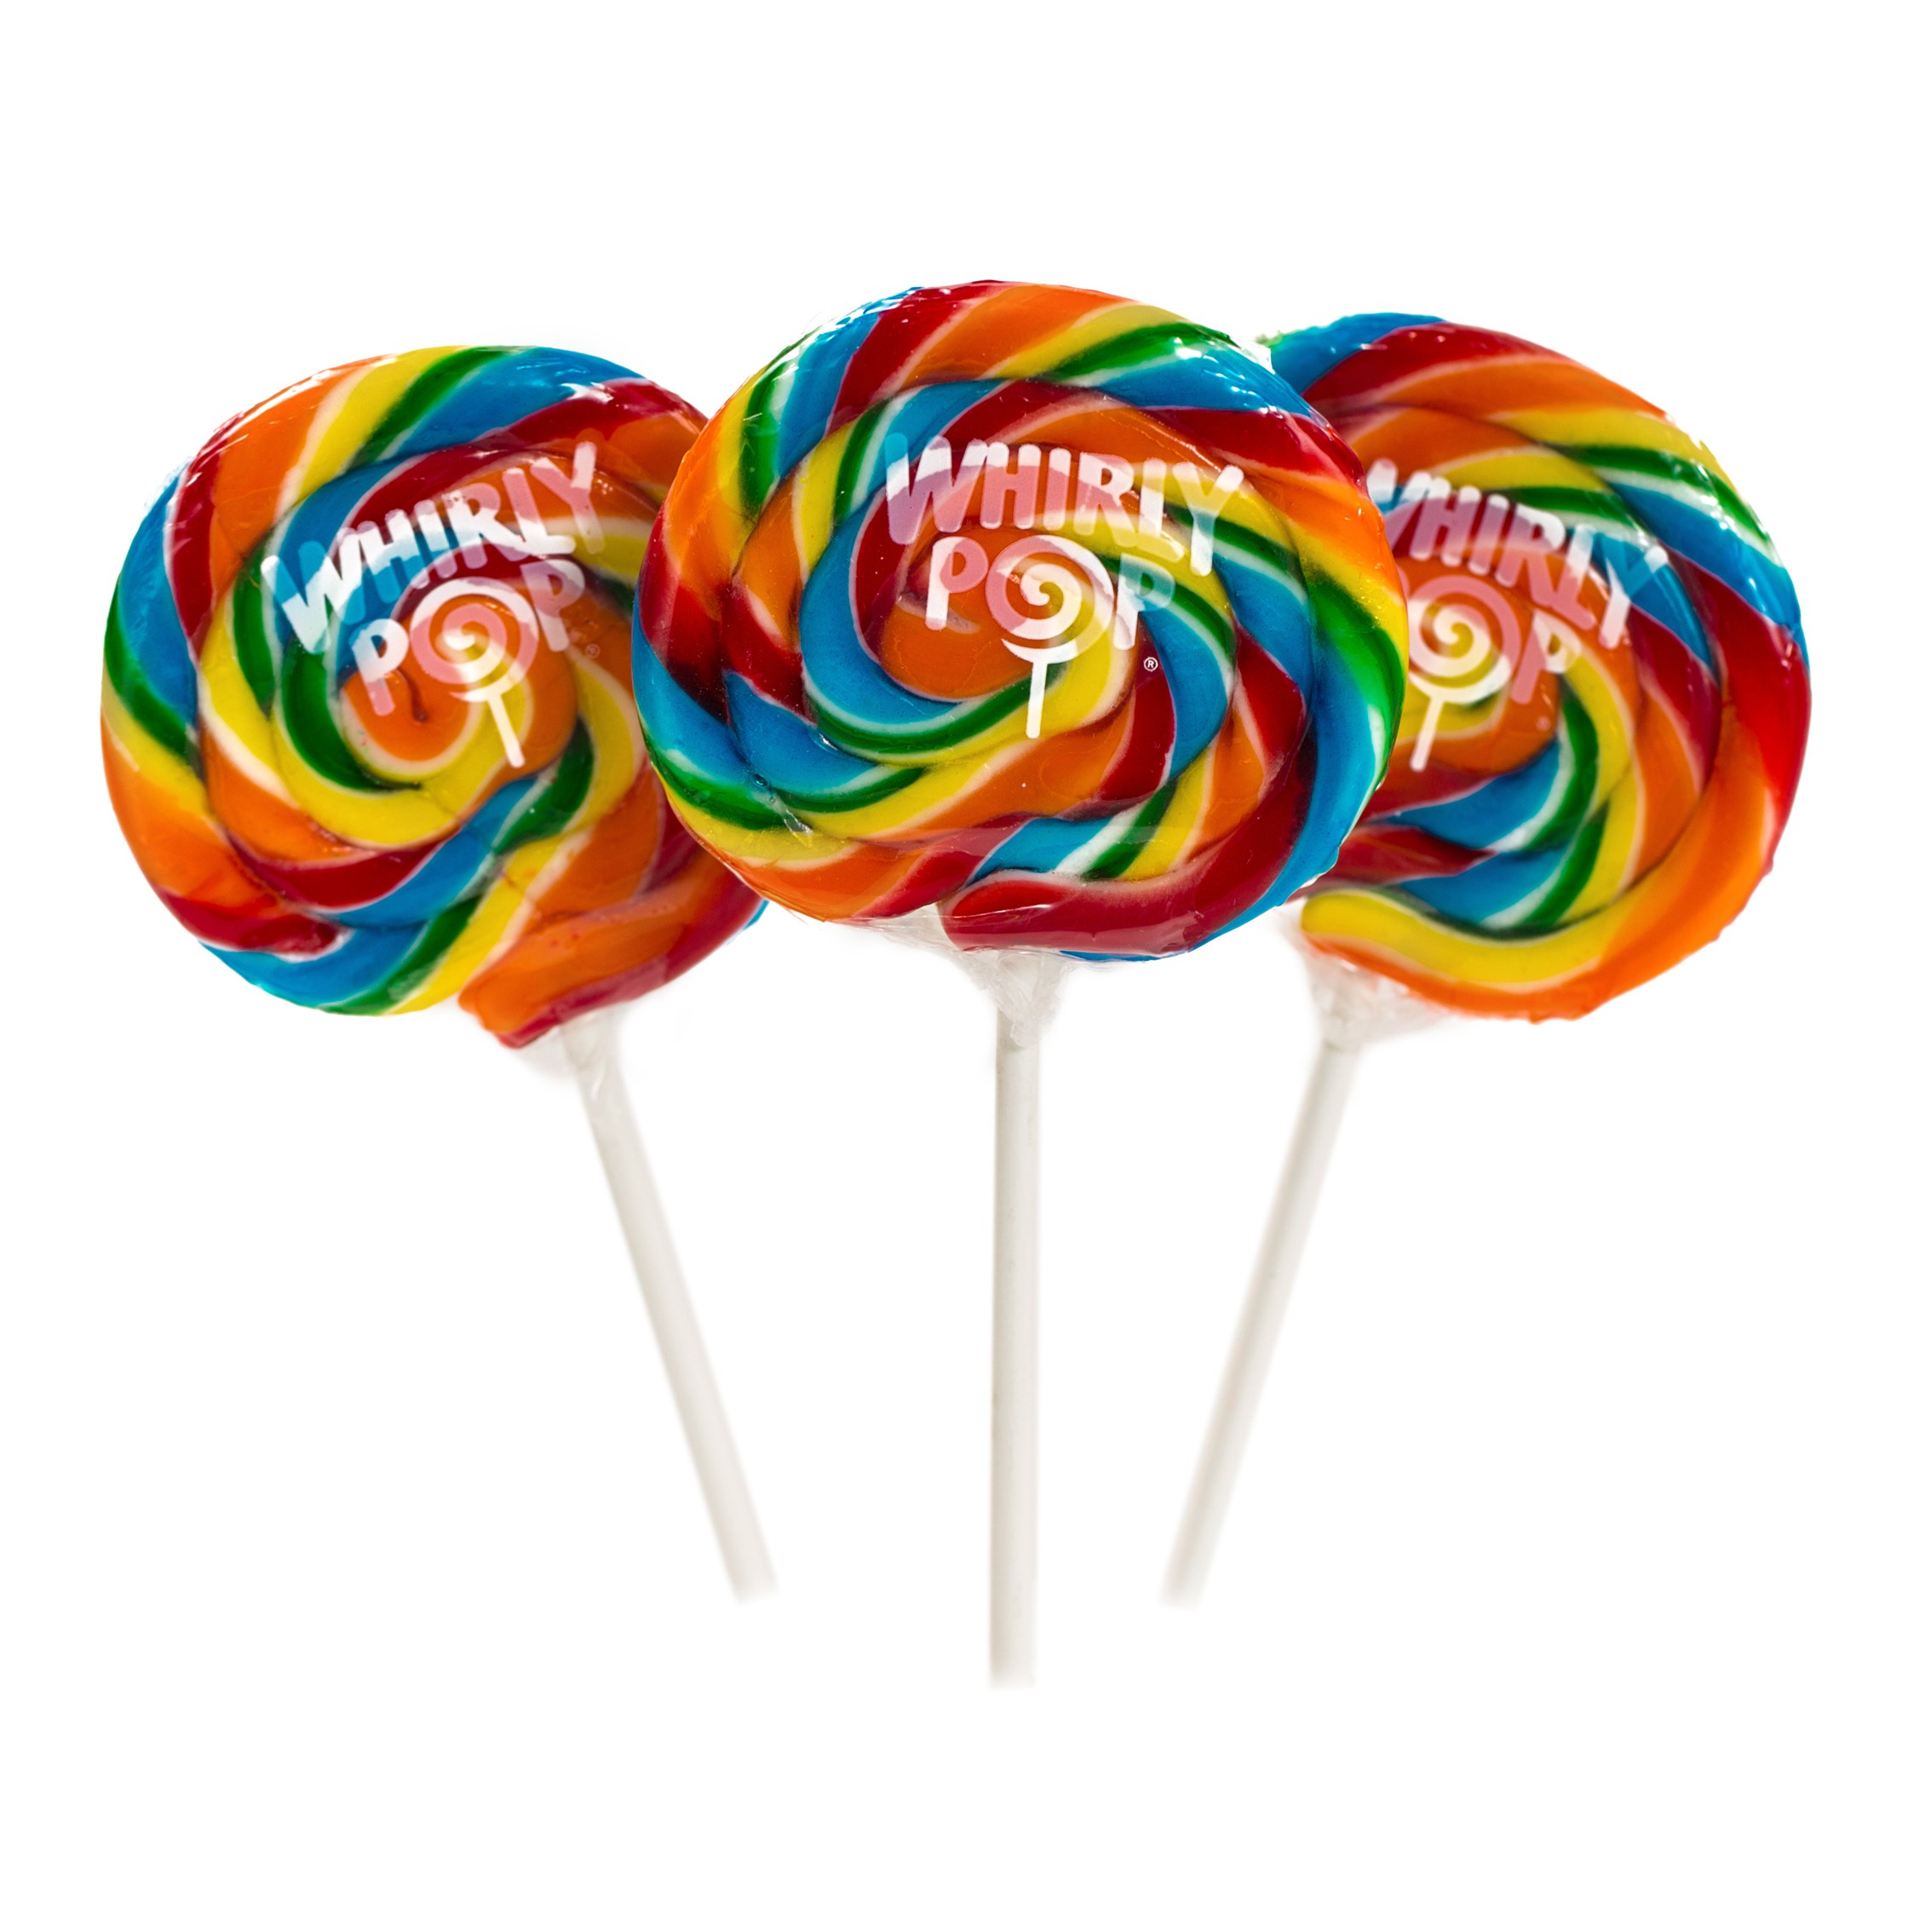 Whirly Pops Candy Lollipops In Display | Sweet City Candy